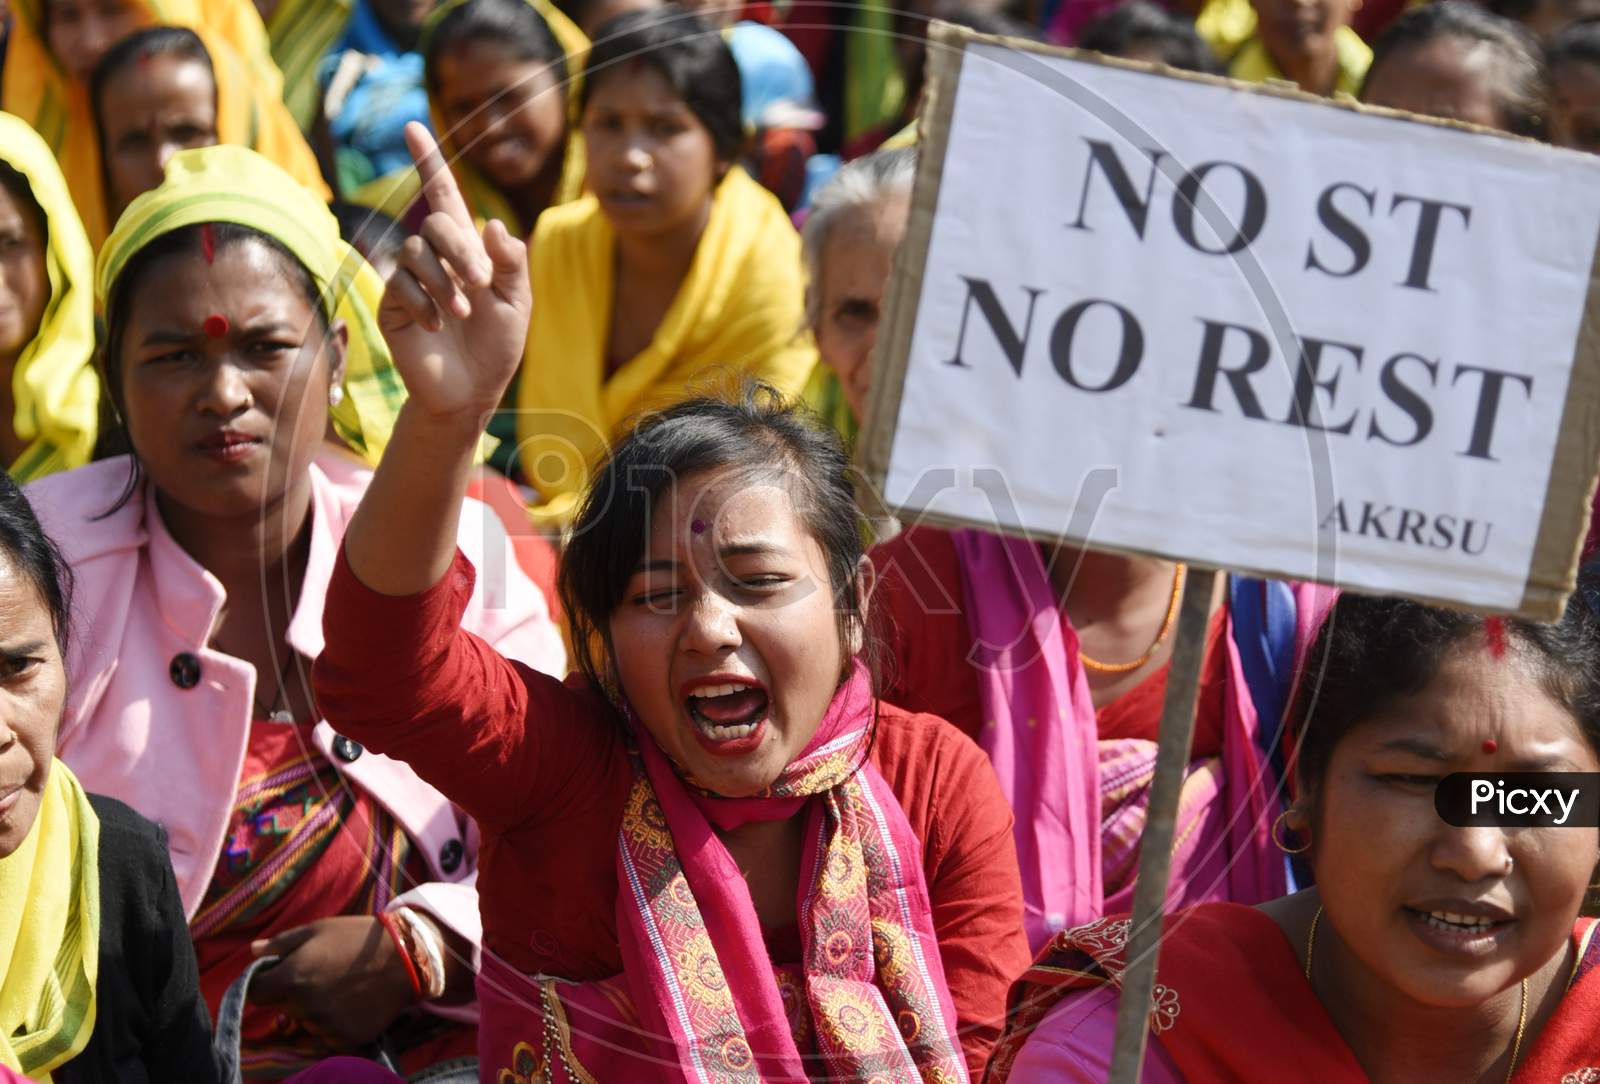 Koch-Rajbongshis Stage A Protest Demanding For A Separate State Of Kamatapur And Scheduled Tribe (St) Status To The Koch-Rajbongshi Community, In Guwahati